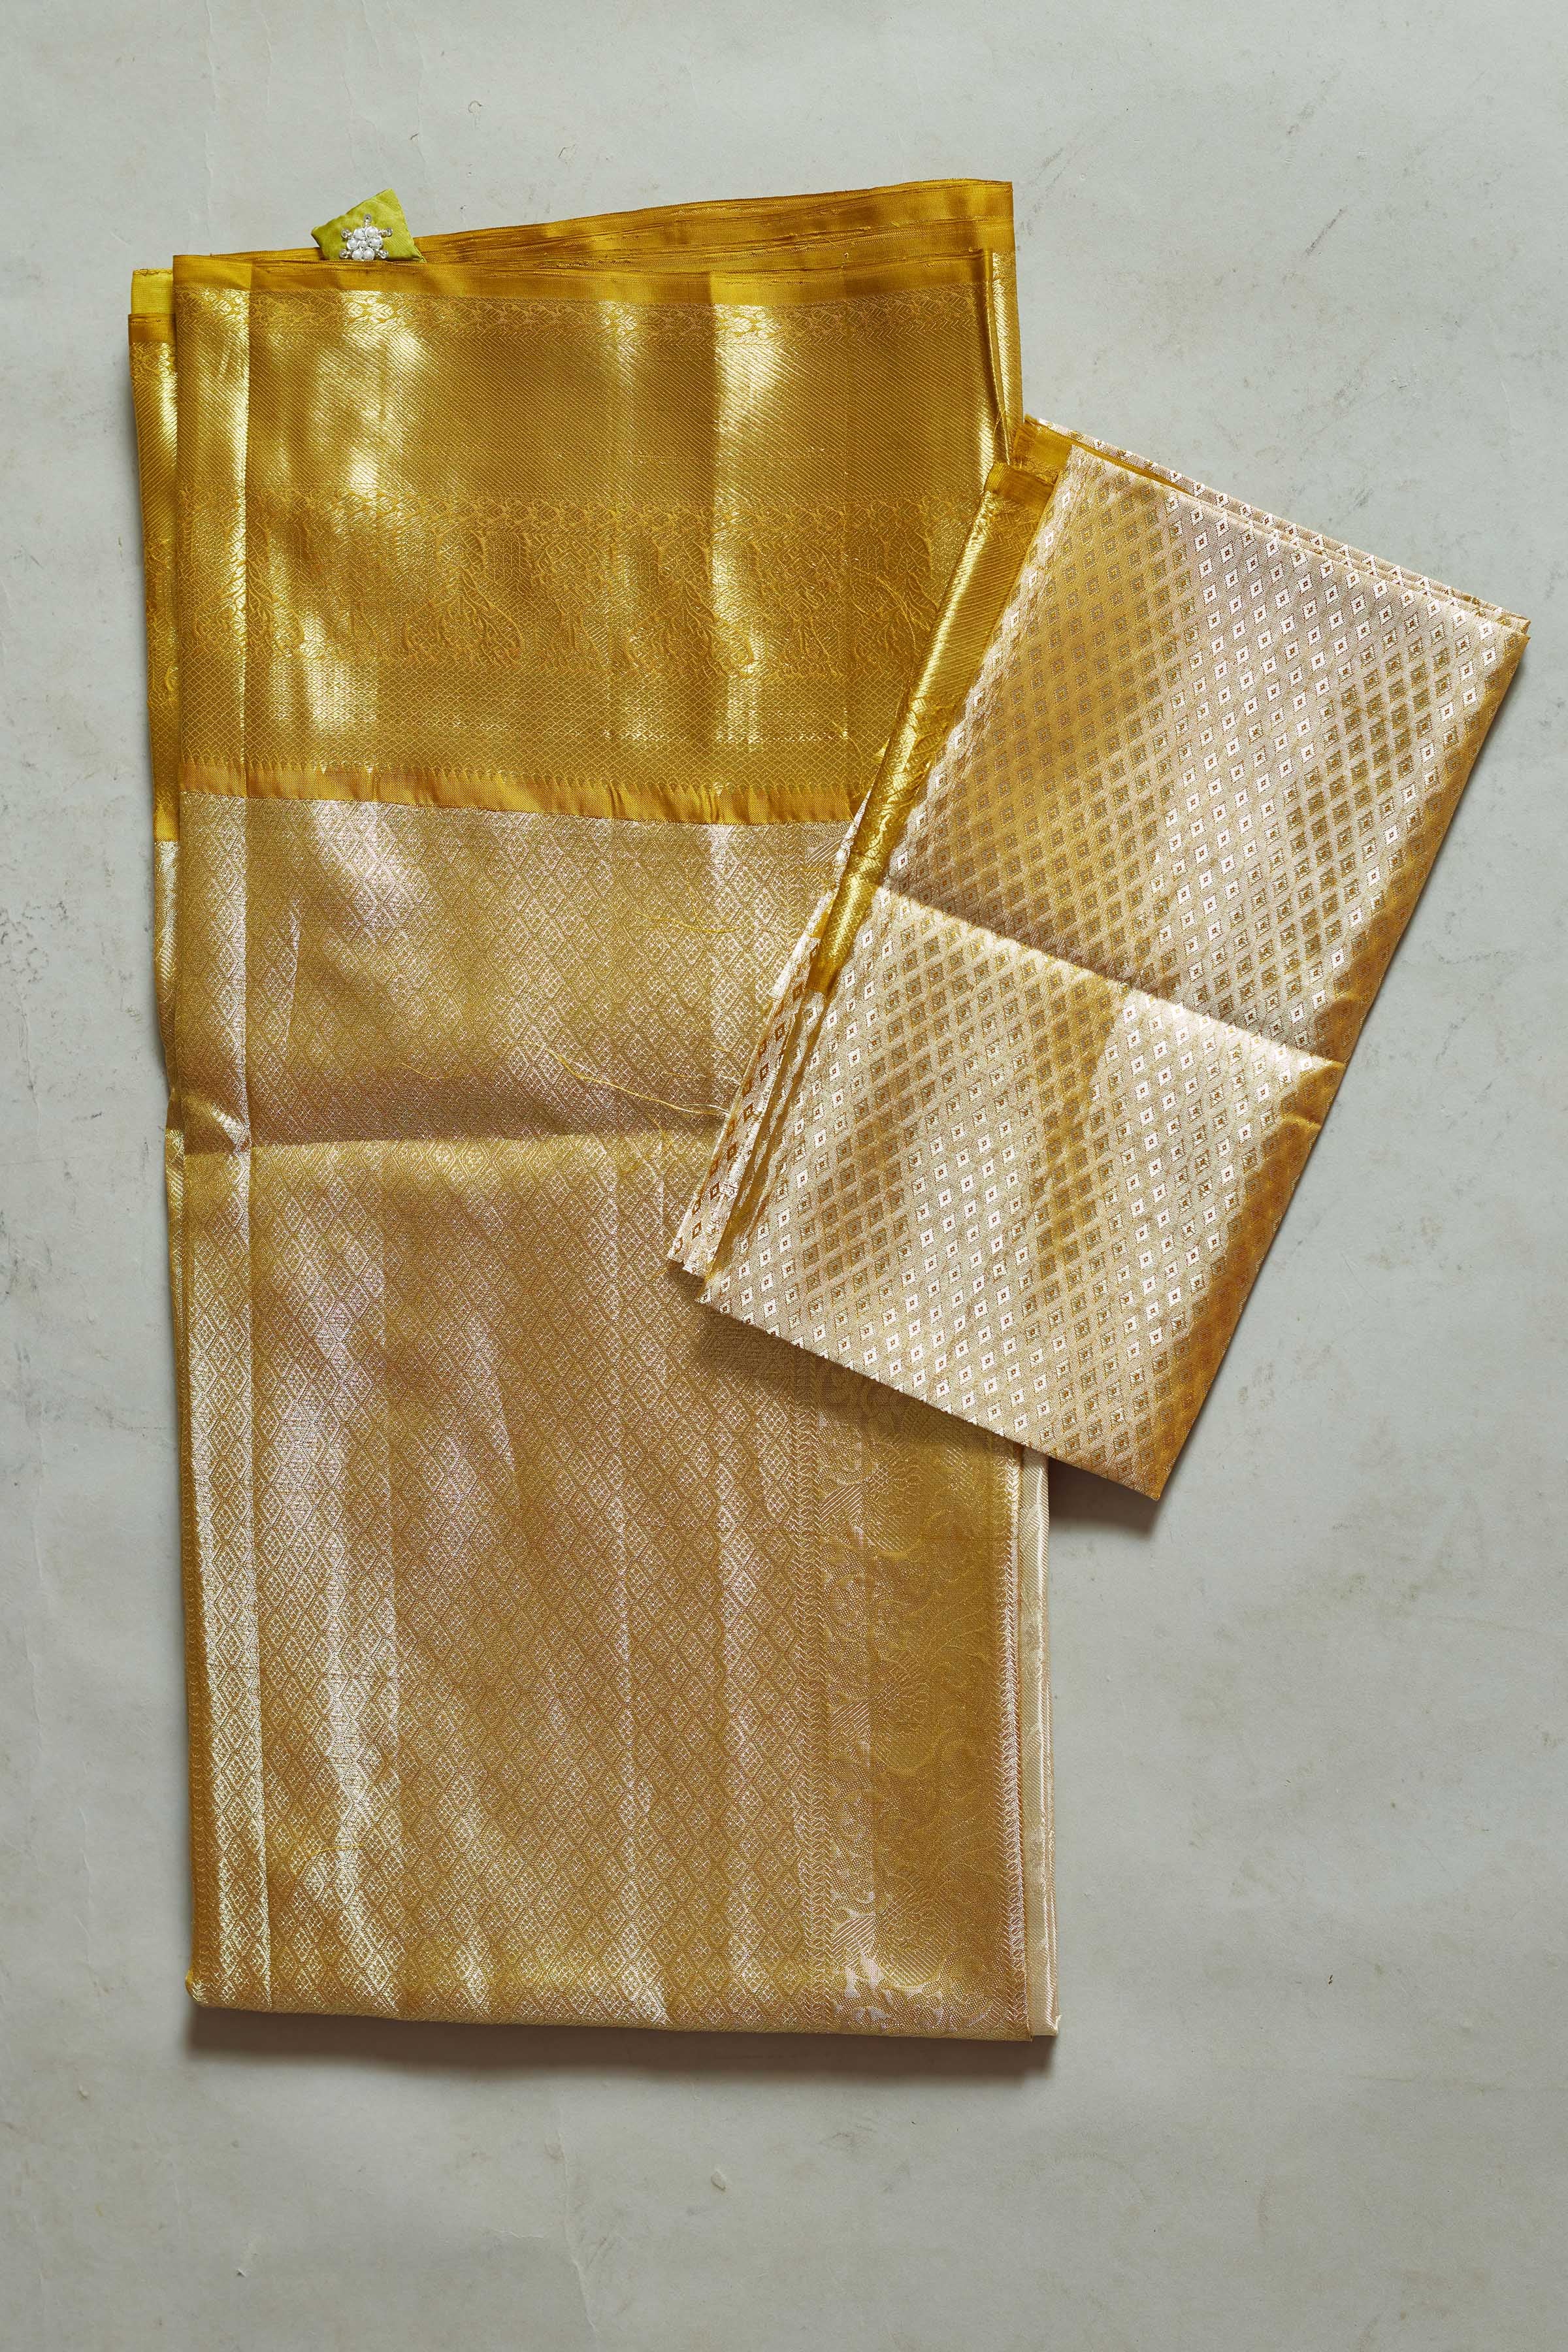 Shop cream Kanjivaram silk sari online in USA with golden zari border. Look your best on festive occasions in latest designer sarees, pure silk sarees, Kanjivaram silk saris, handwoven saris, tussar silk sarees, embroidered saris from Pure Elegance Indian clothing store in USA.-blouse